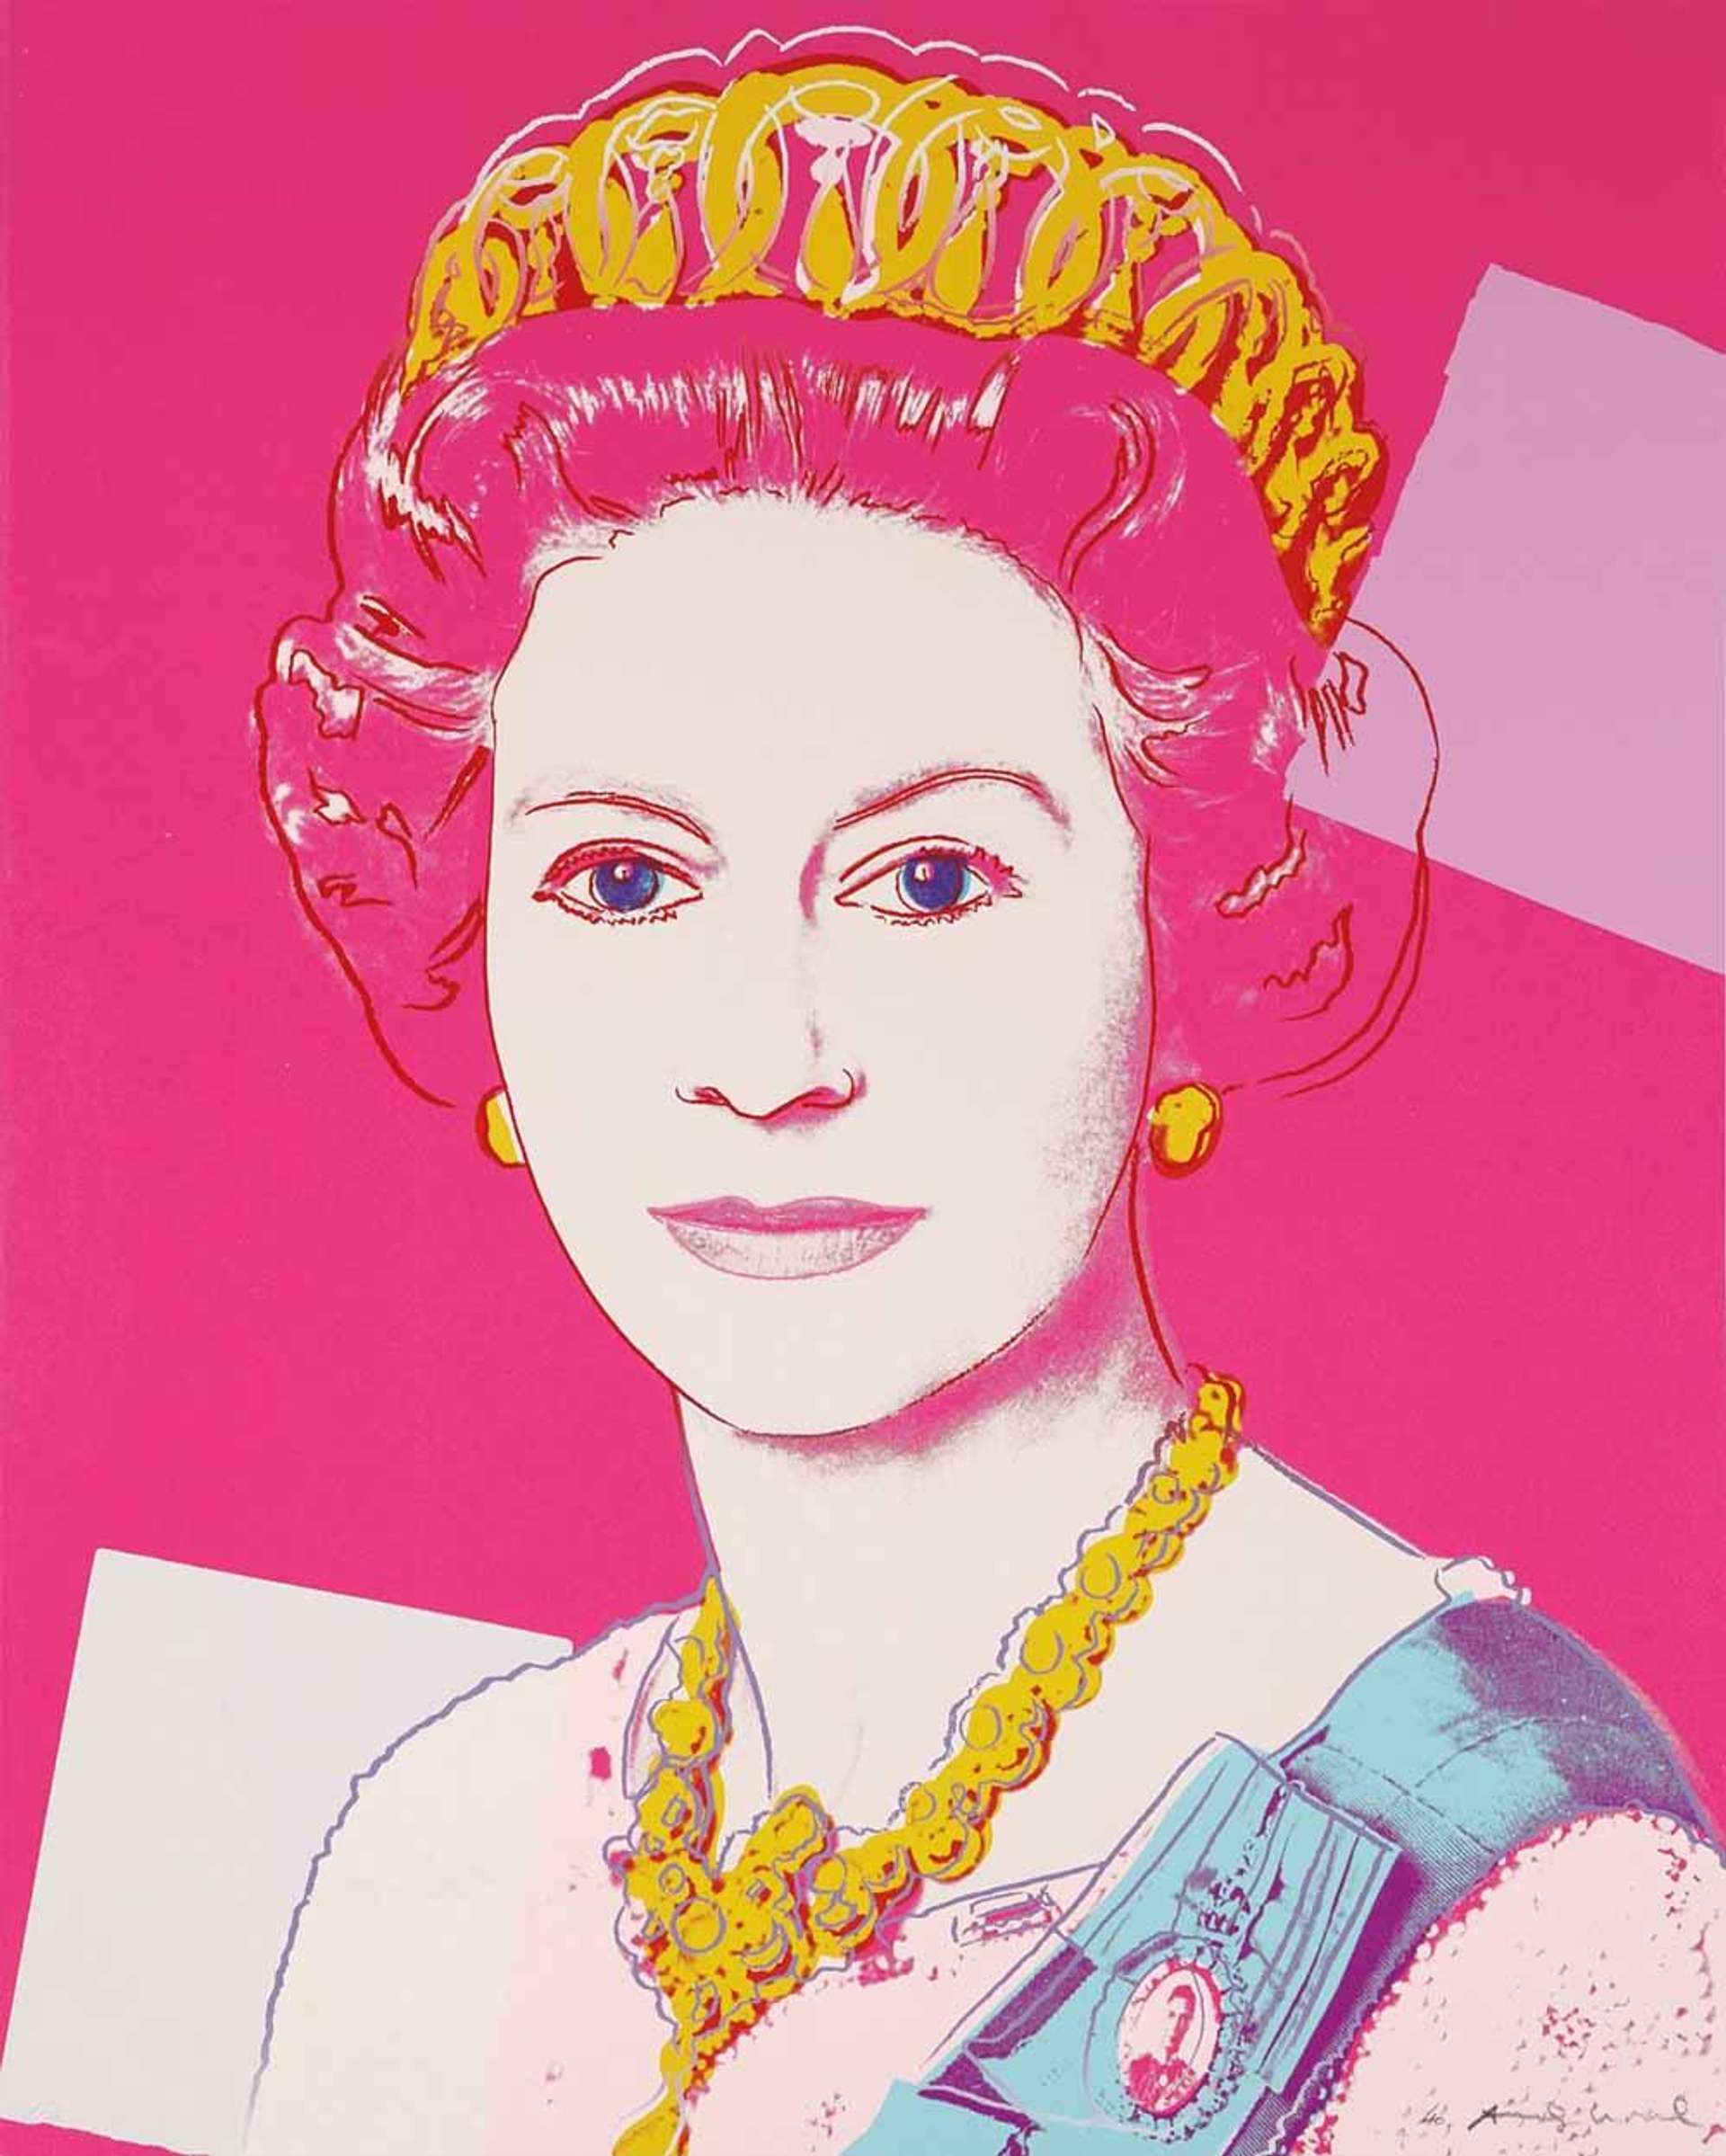 A screenprinted portrait of Queen Elizabeth II on a vibrant pink background. The queen wears a crown and an elaborate necklace, gazing directly at the viewer. Colorful abstract blocks create a dynamic backdrop.